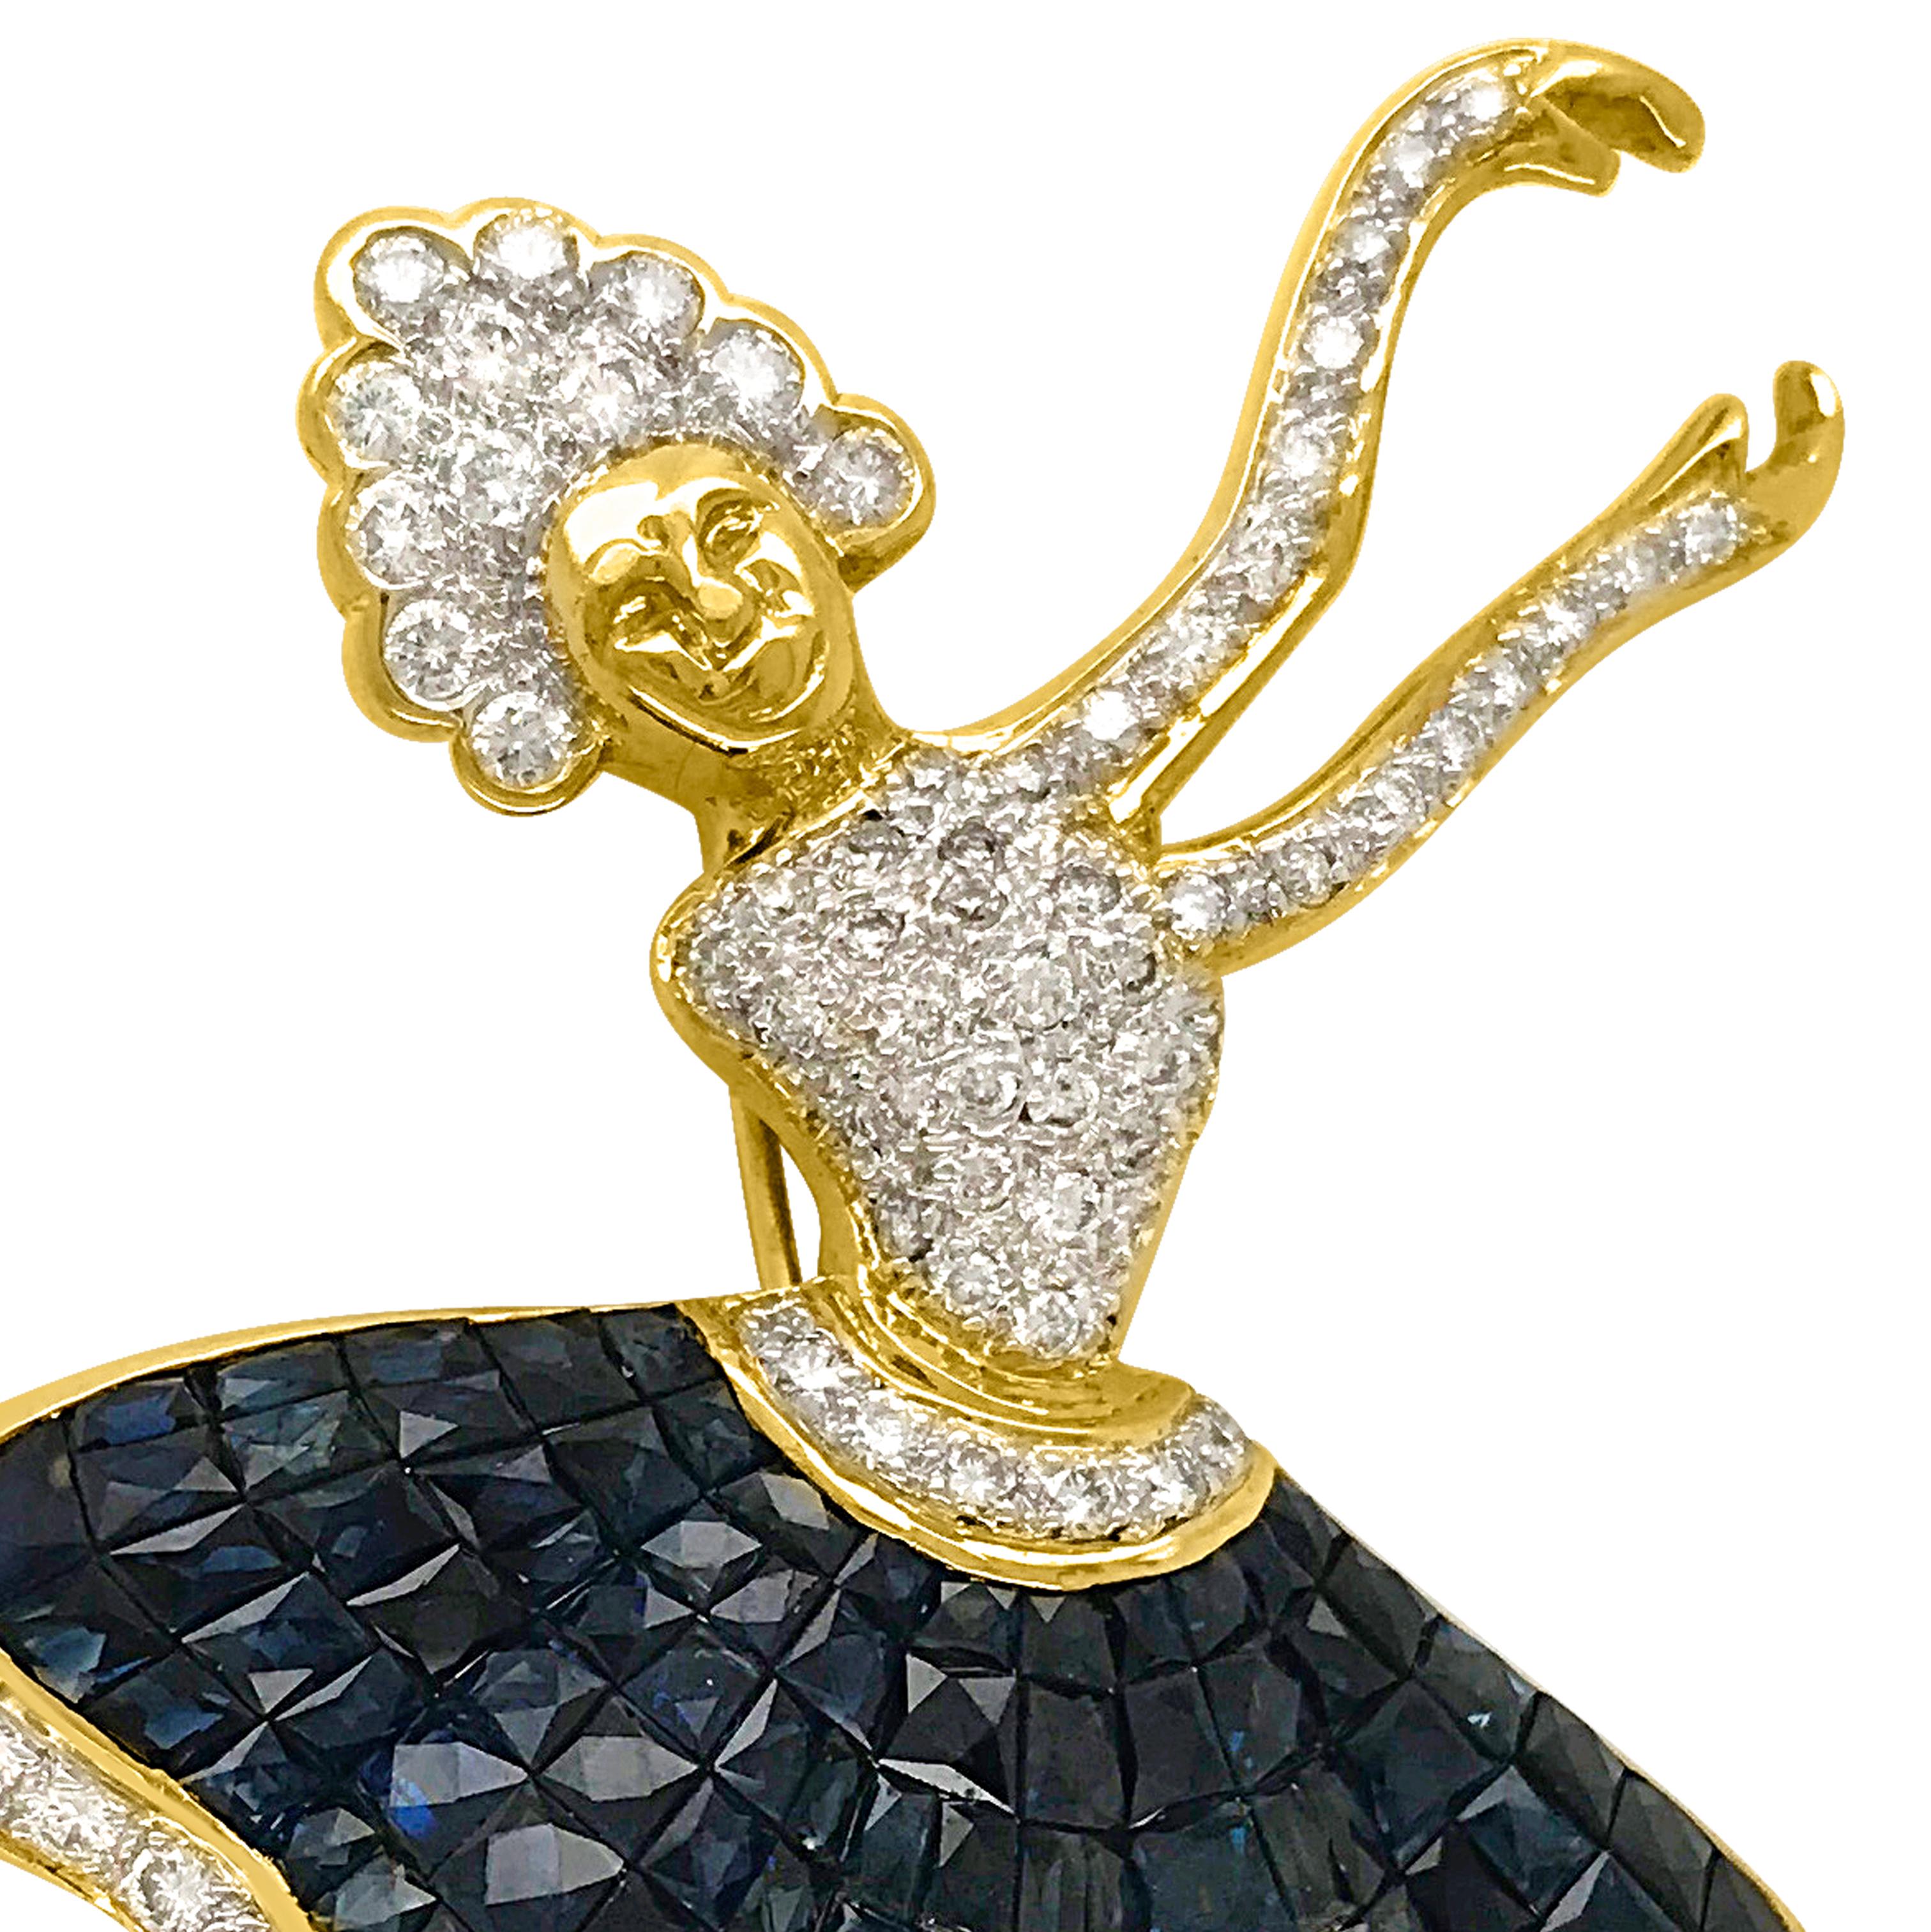 This outstanding Ballerina brooch pin is handcrafted in solid 18K yellow gold weighing approx. 15.4 grams, measuring 60*45mm. It features a dancing Ballerina calibrated 112 modified rectangular-cut sapphires in invisible settings, cumulatively